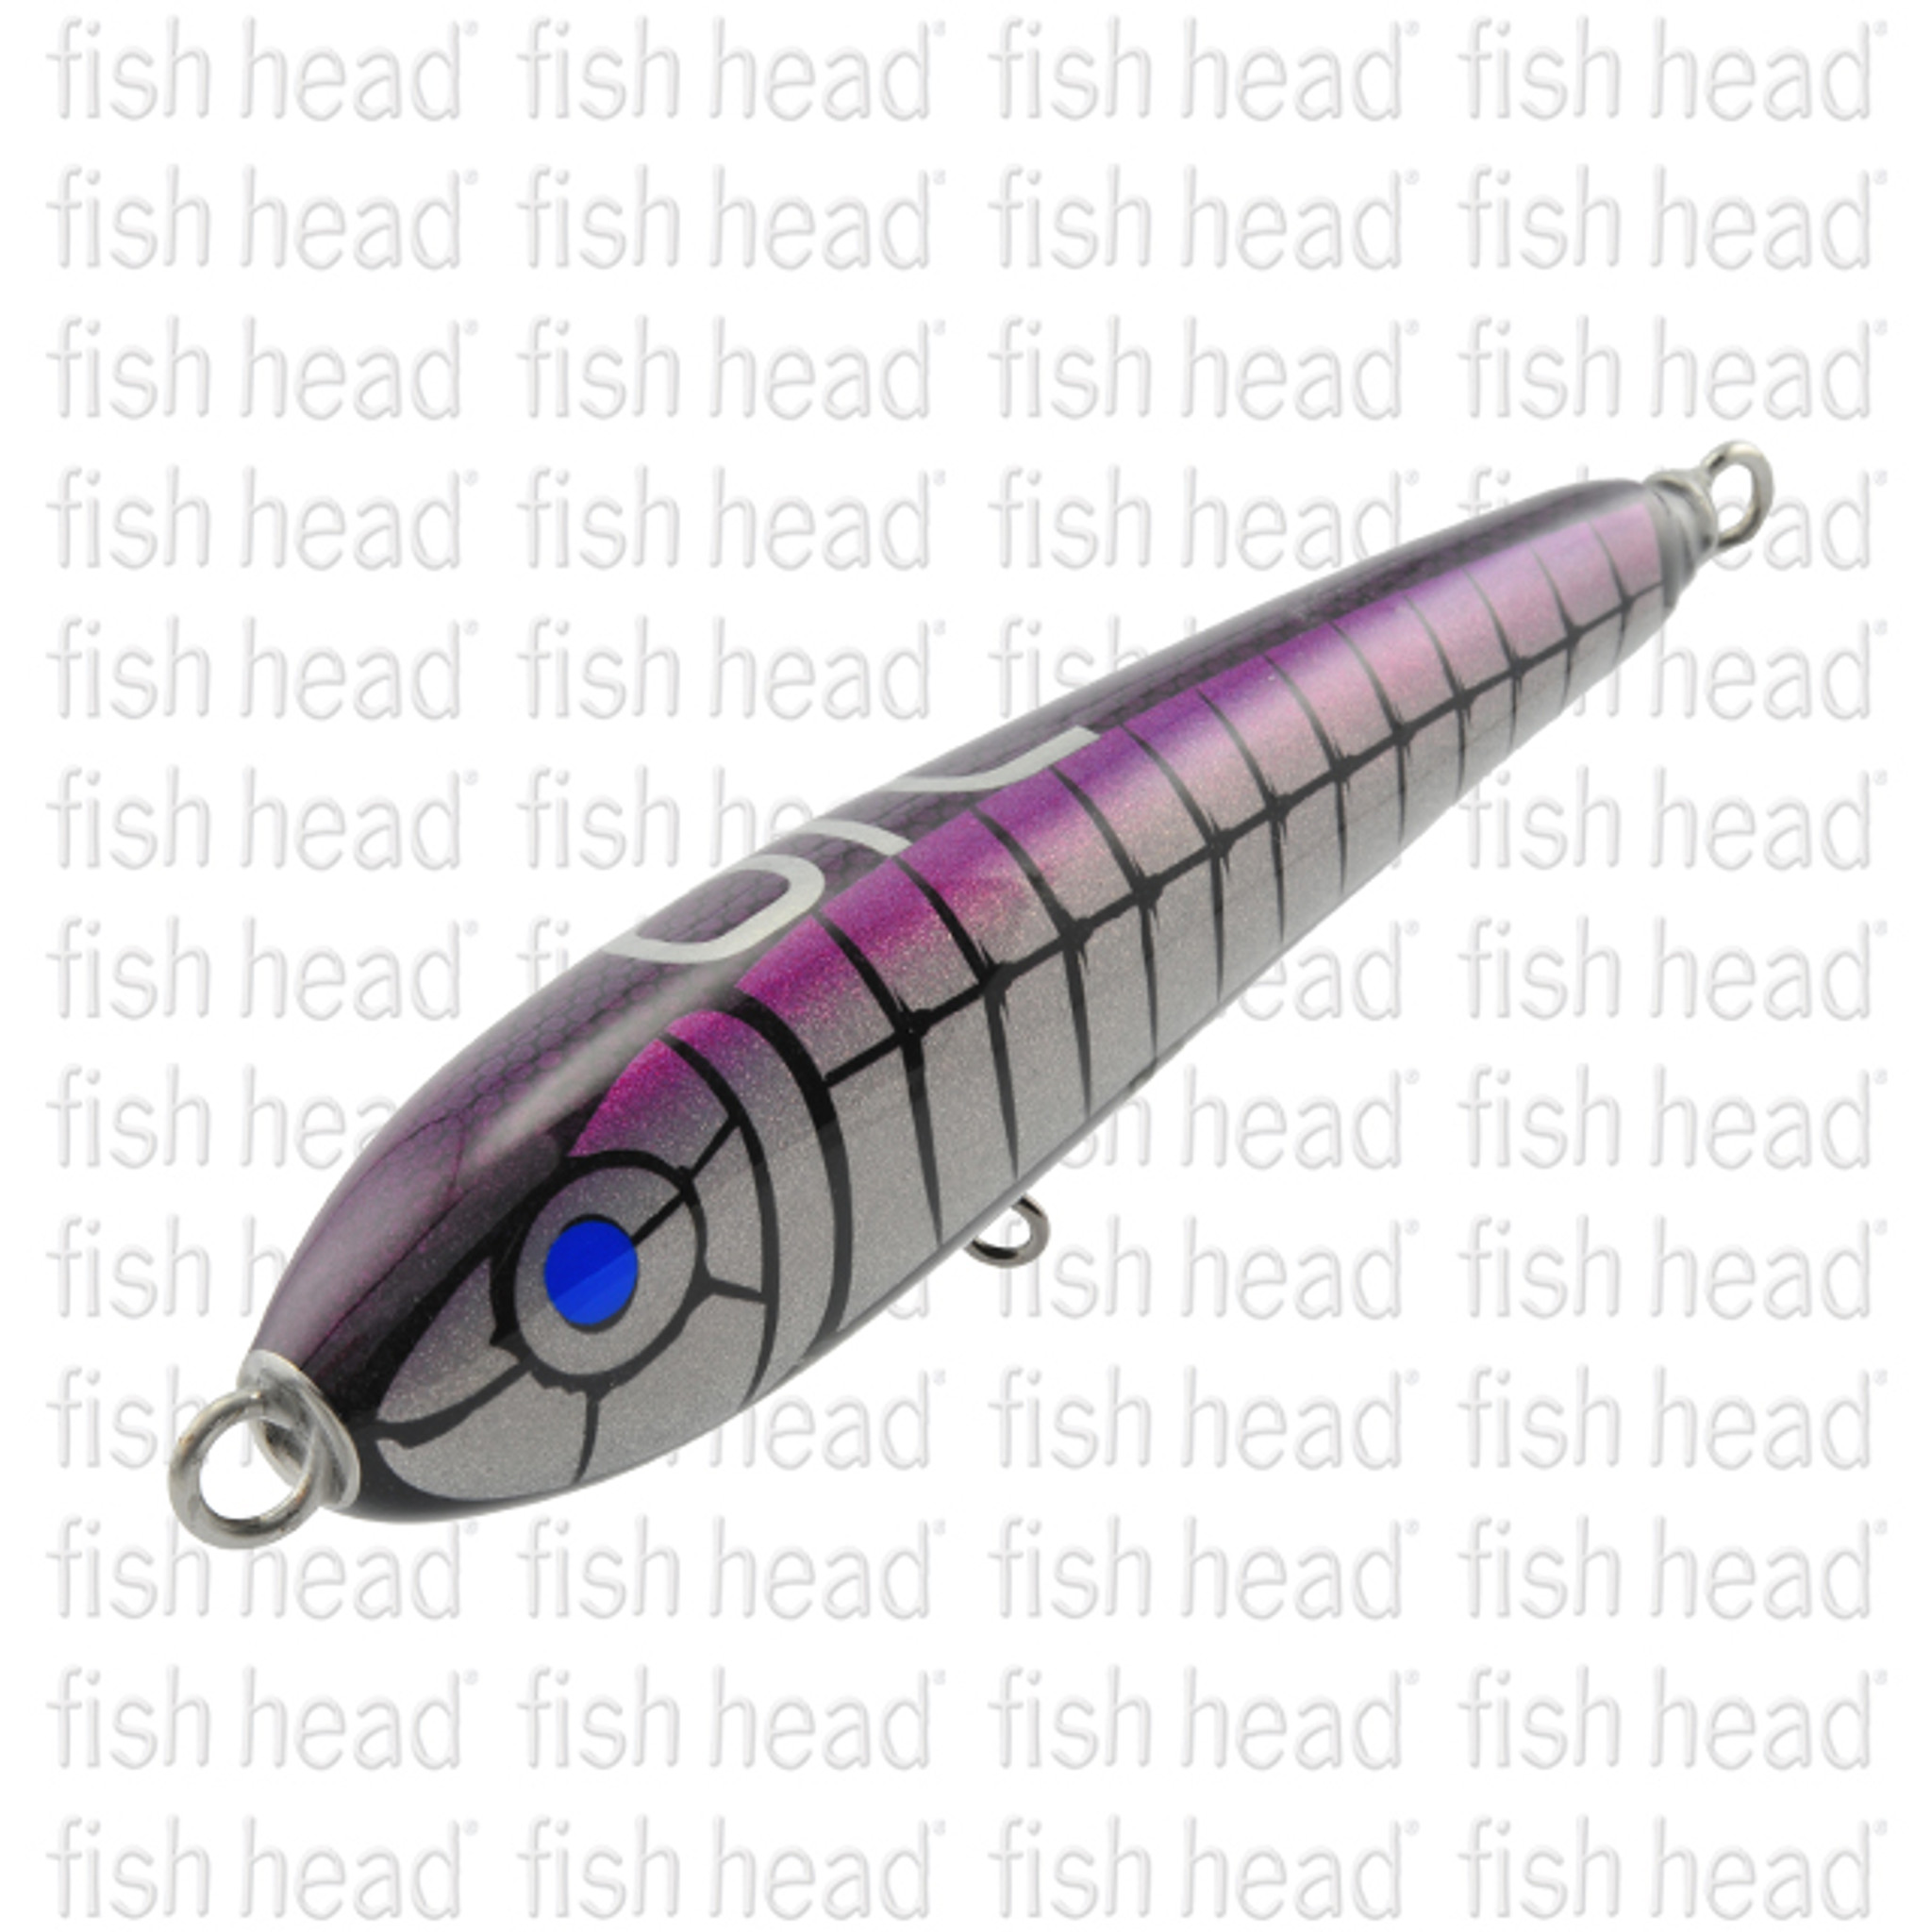 https://cdn11.bigcommerce.com/s-urlny/images/stencil/2048x2048/products/2645/6795/On_Top_Lures_Chop_50g_-_Cover__76062.1628217549.jpg?c=2